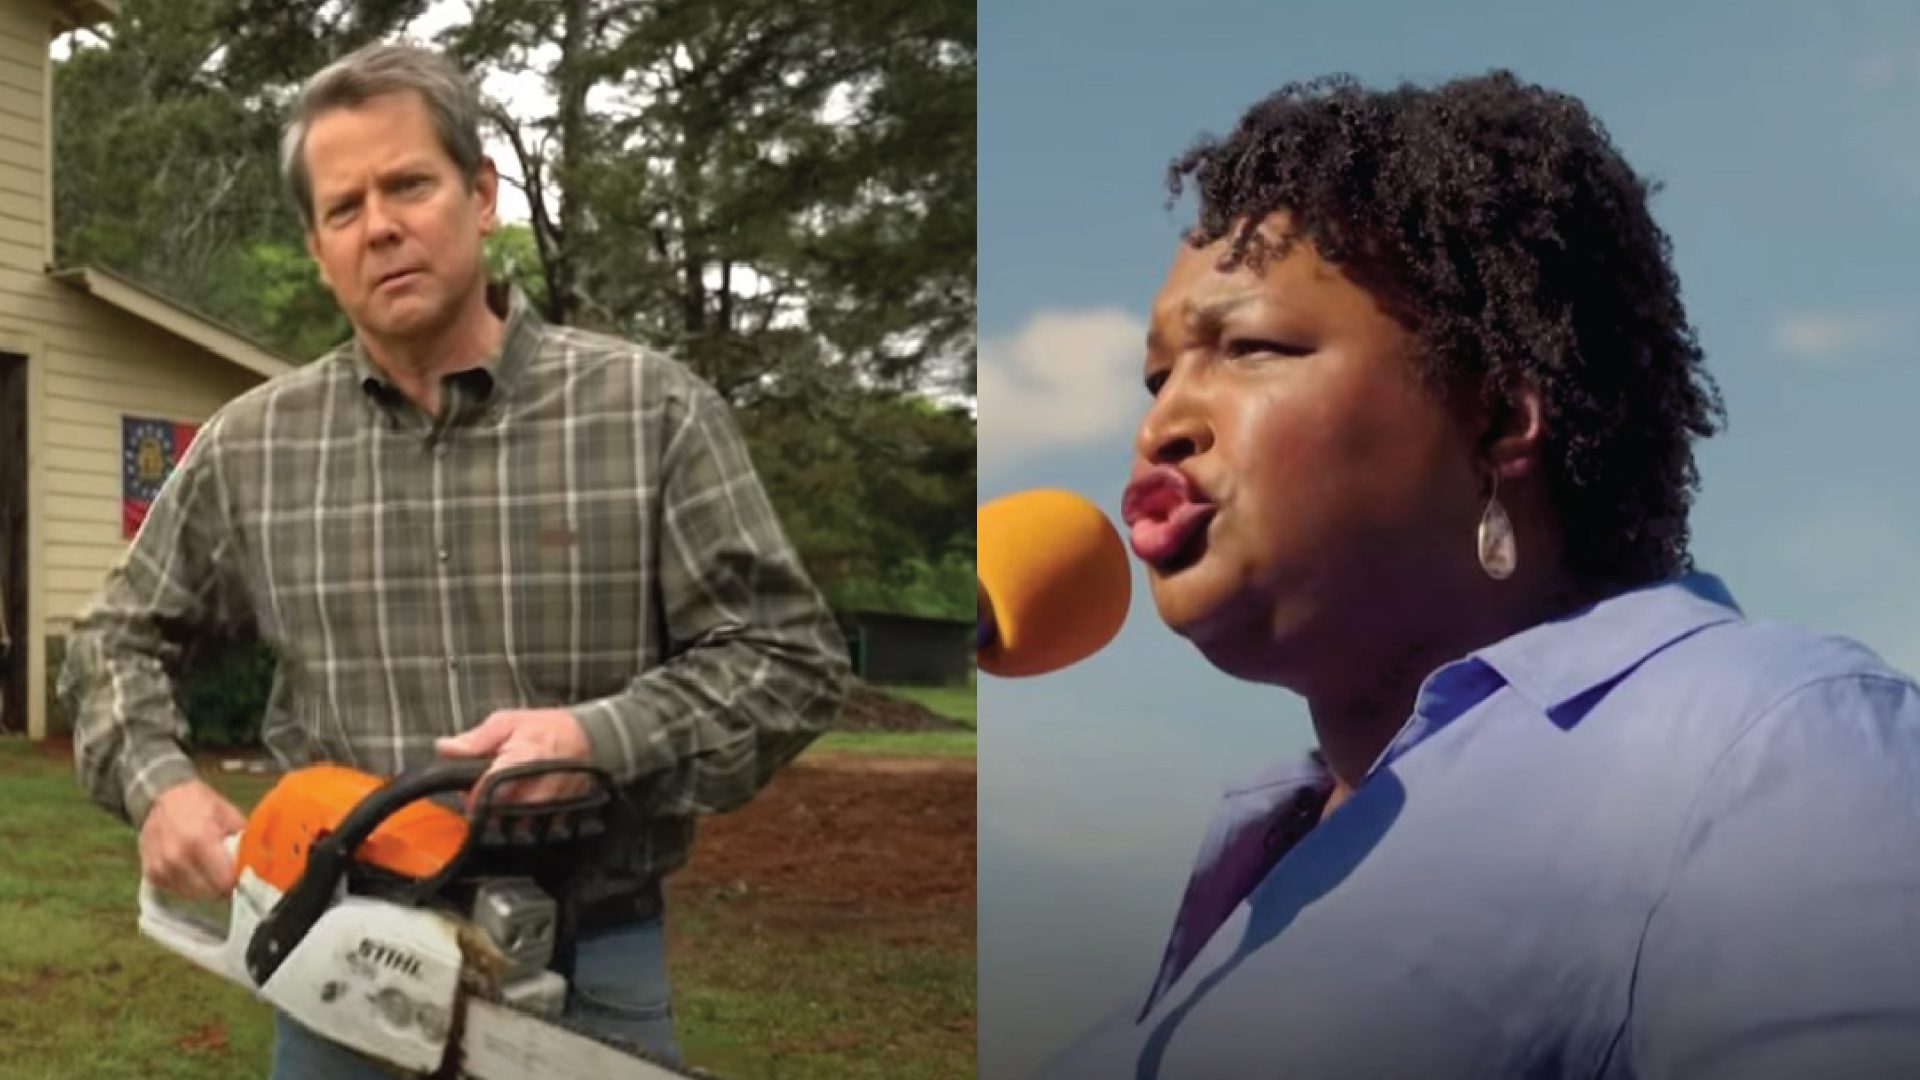 Georgia Governor Brian Kemp goes after Stacey Abrams in a new campaign ad.